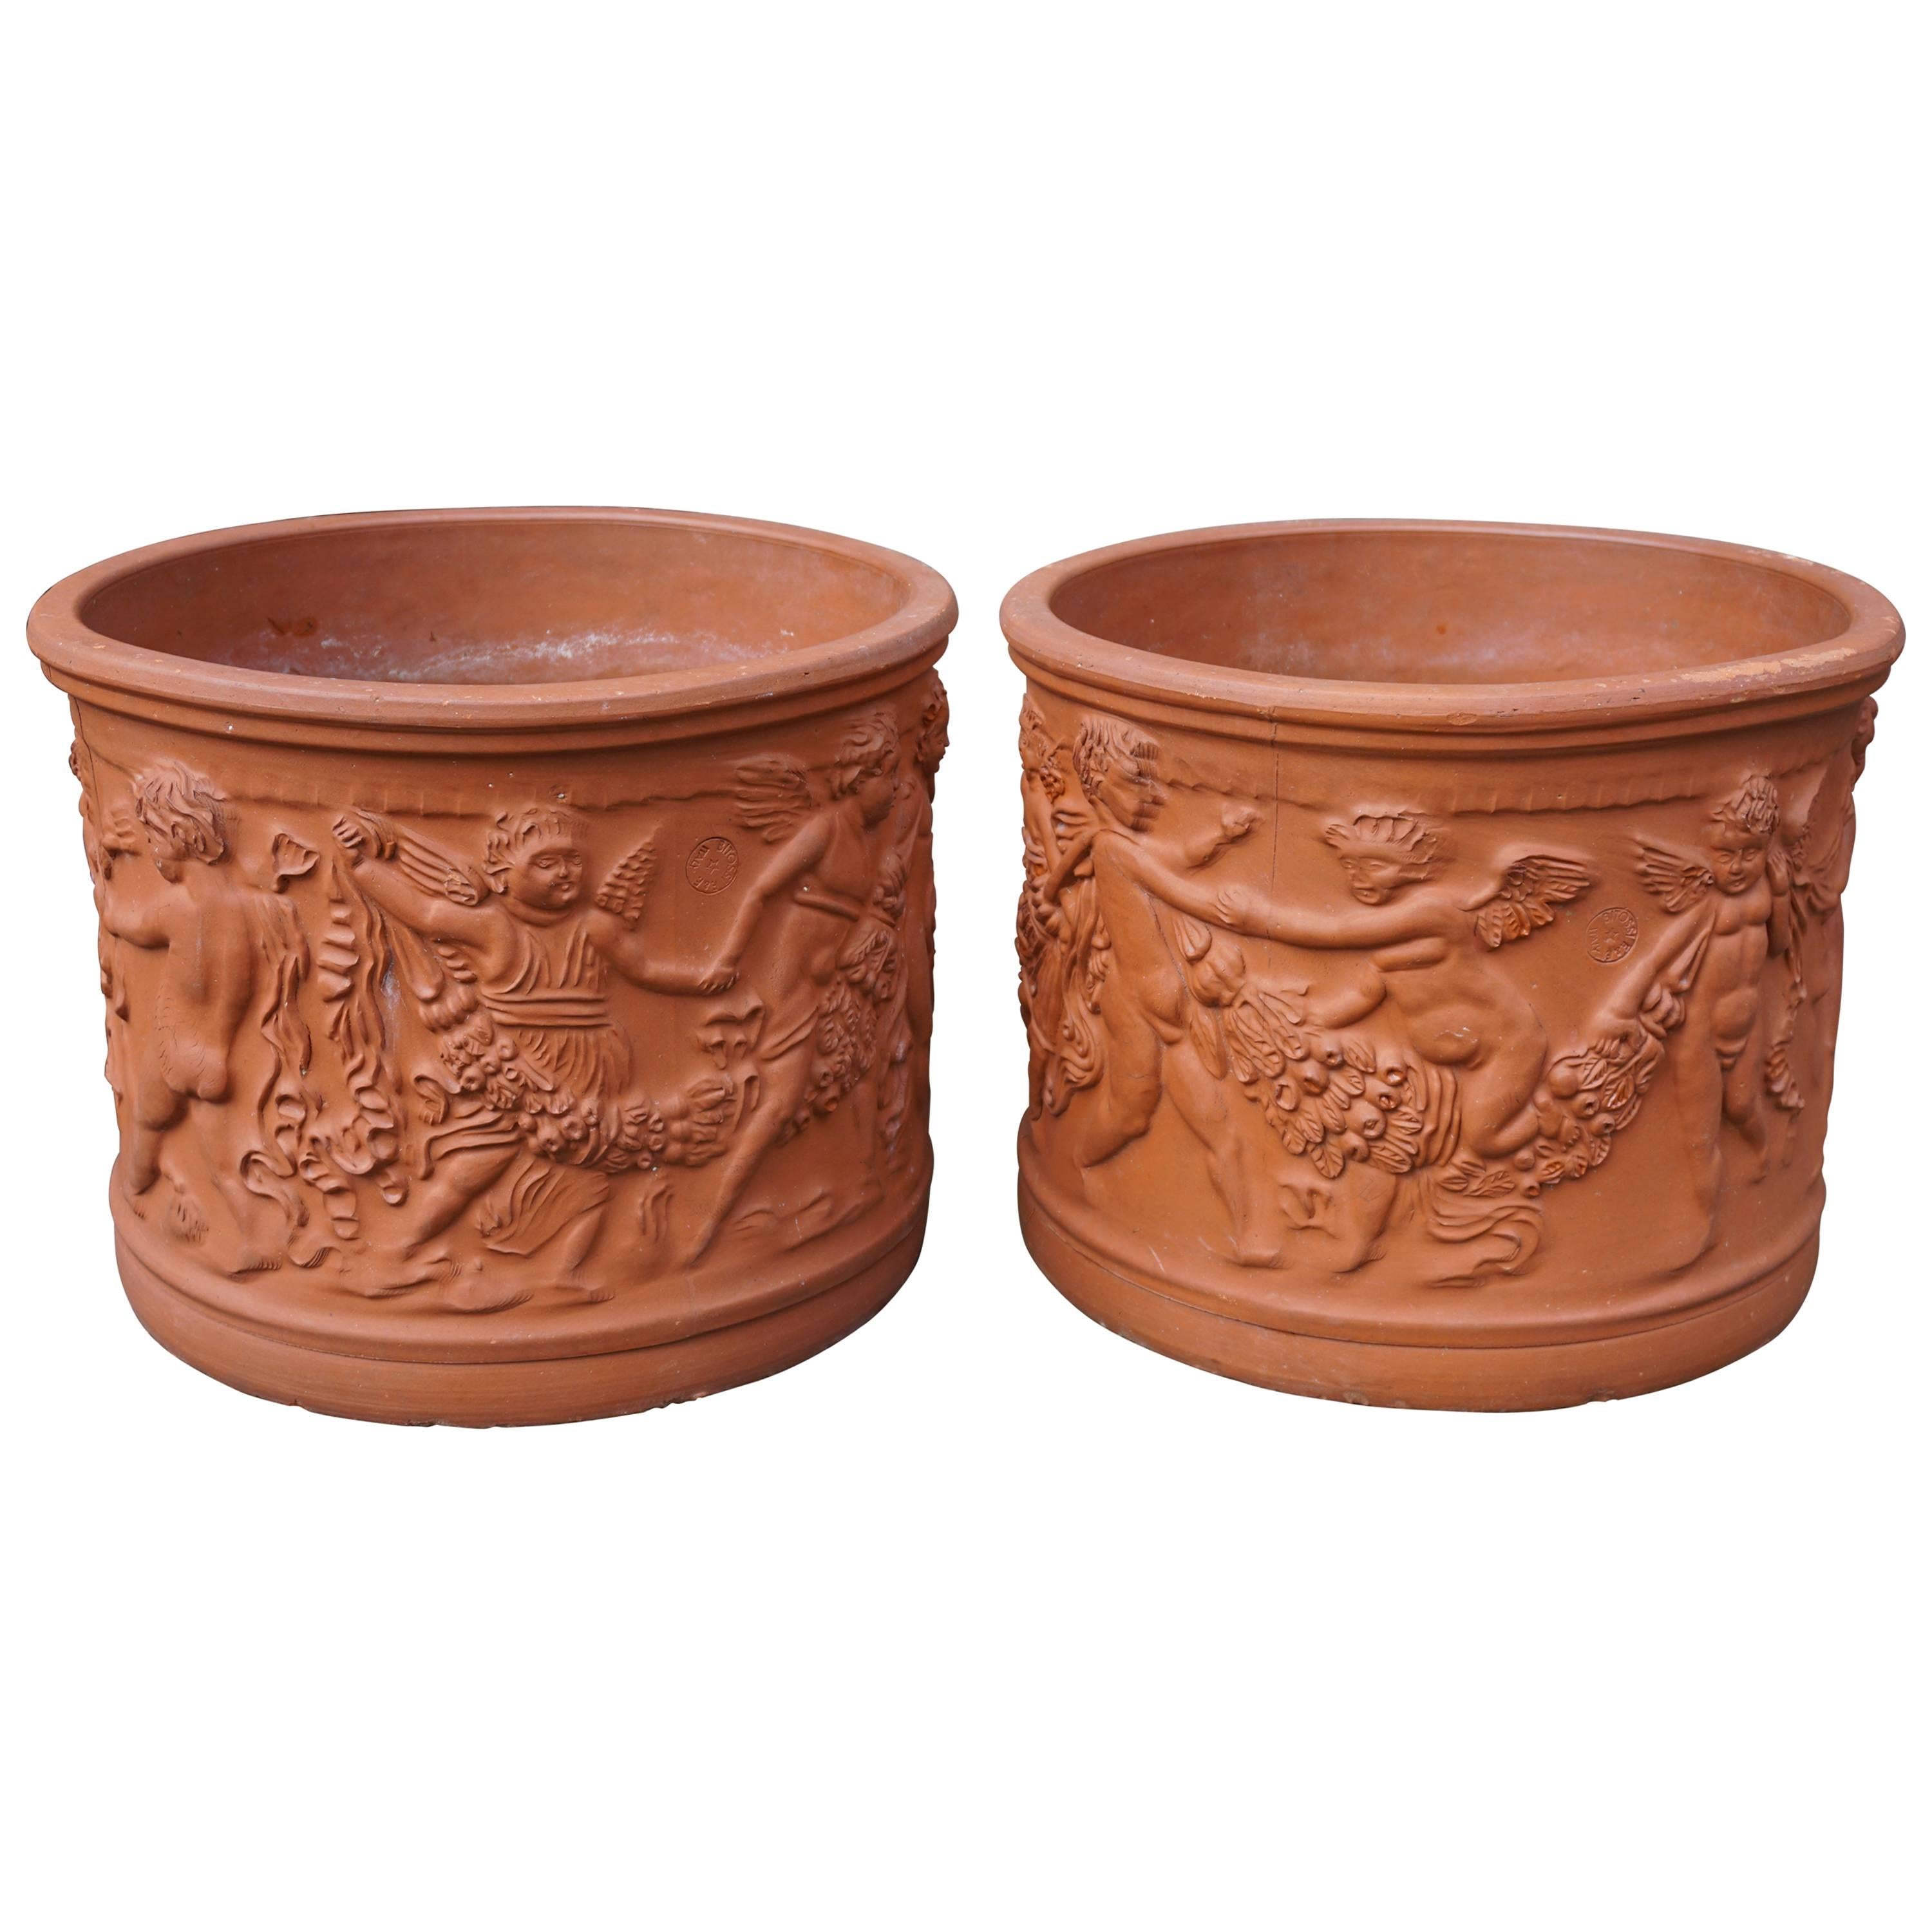 Terracotta Planter or Urn by Bitossi